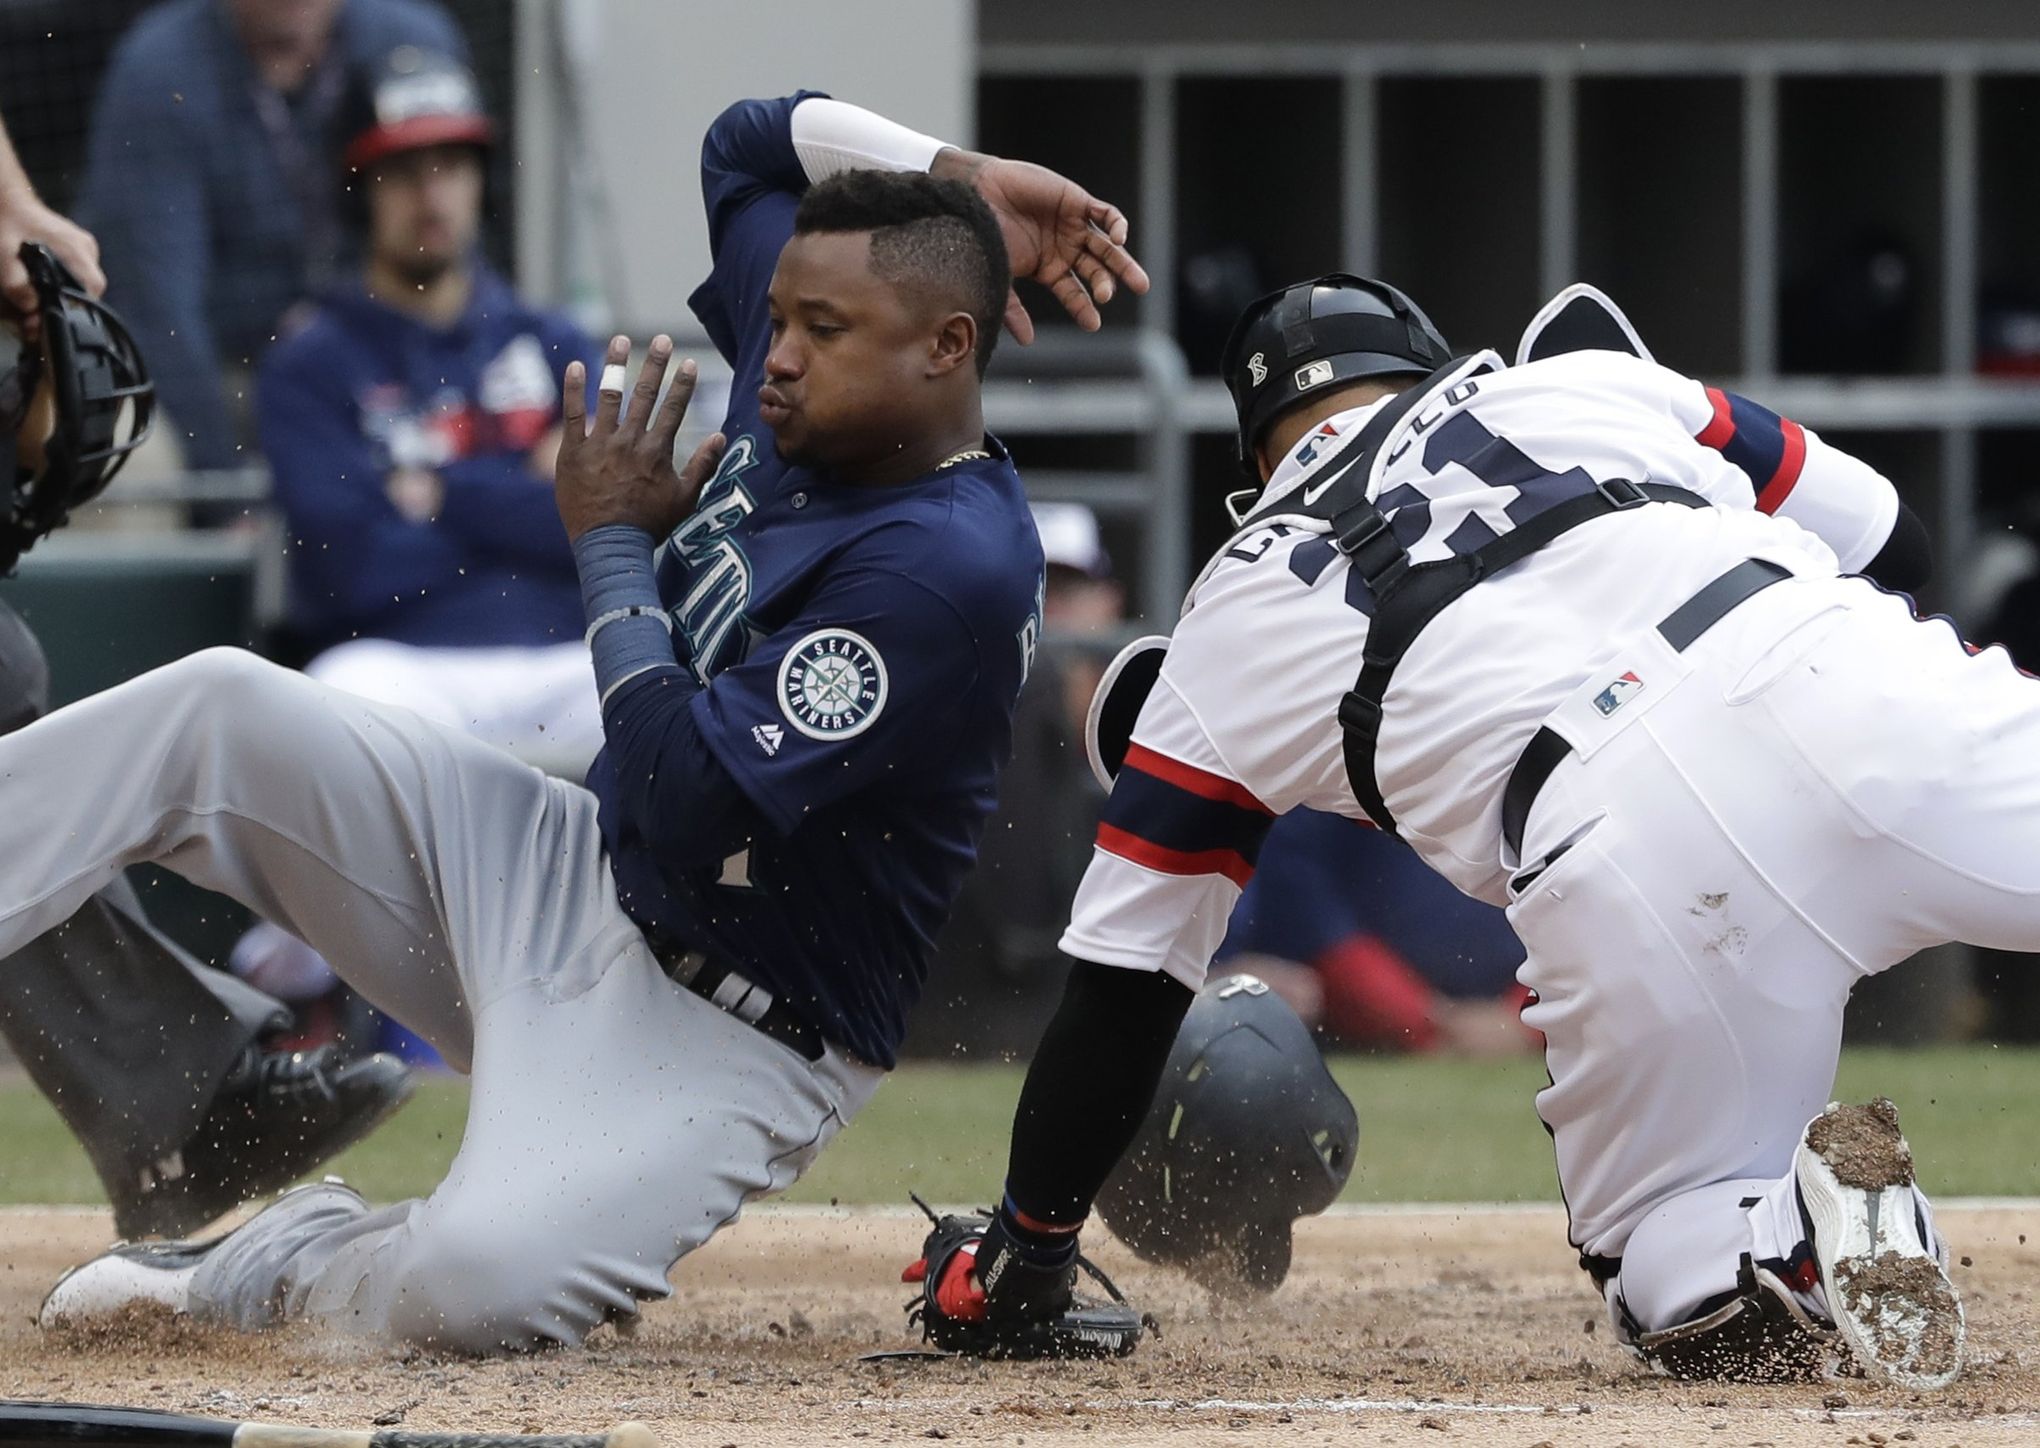 Seattle Mariners 3, Chicago White Sox 0: Seattle's young stars and